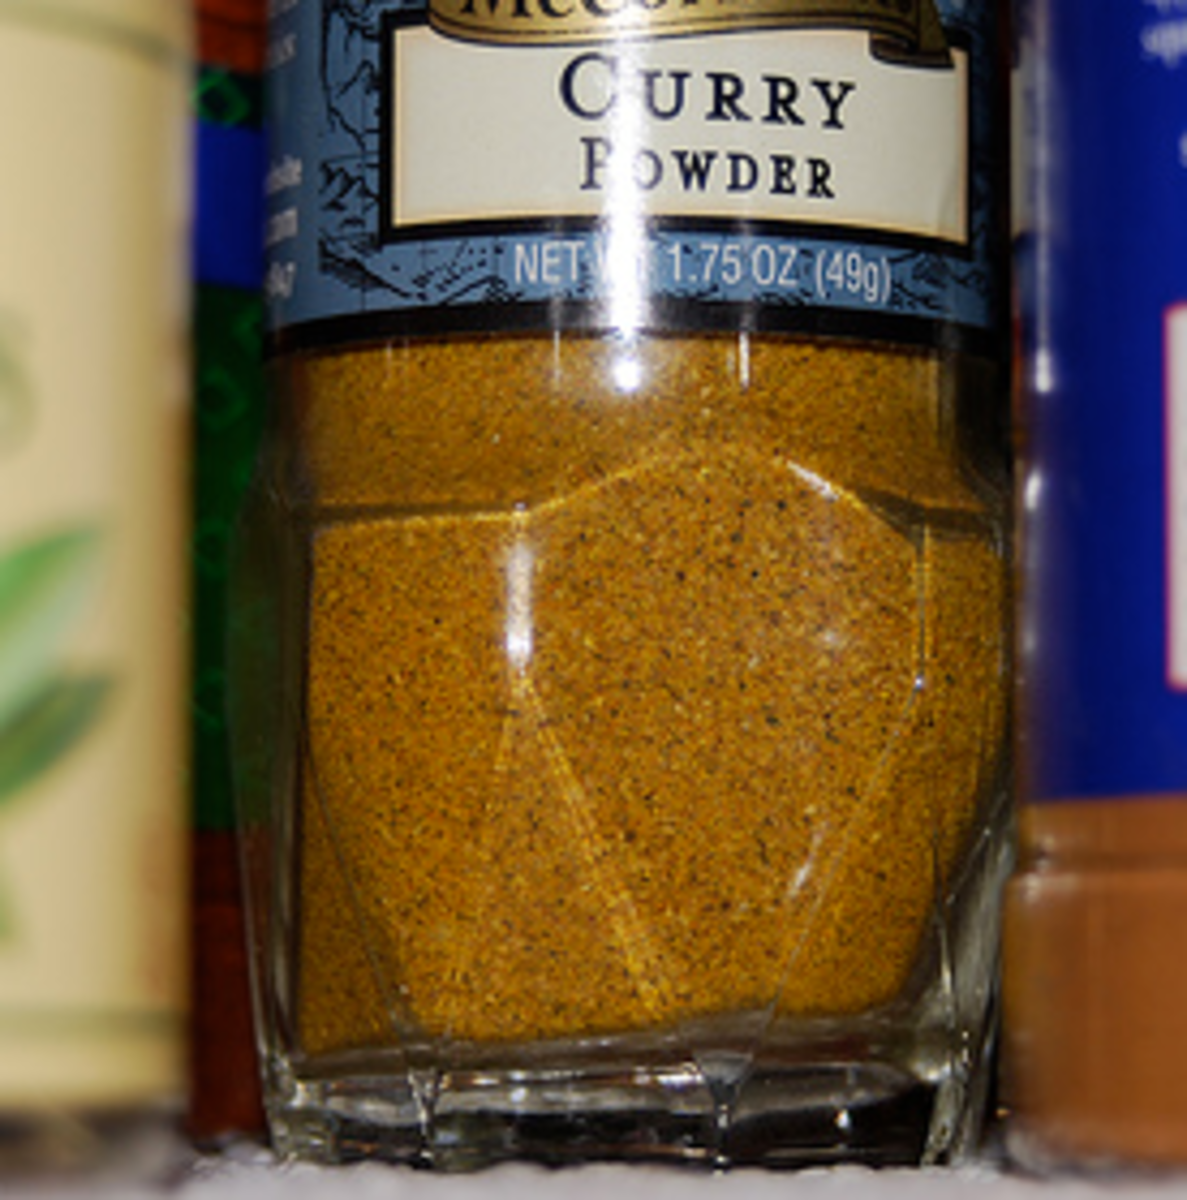 Curry Powder (Photo courtesy by dvanhorn from Flickr.com)